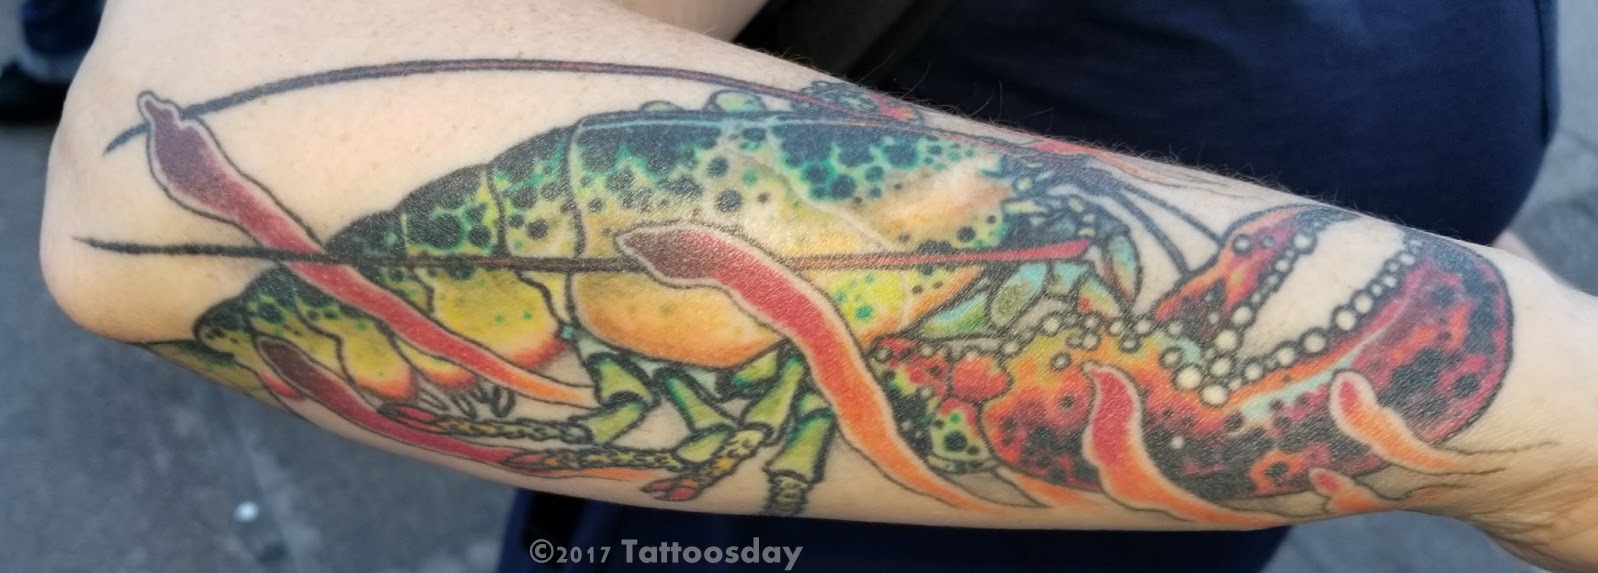 Tattoosday (A Tattoo Blog): The Elusive Union Square Lobster by Jason June